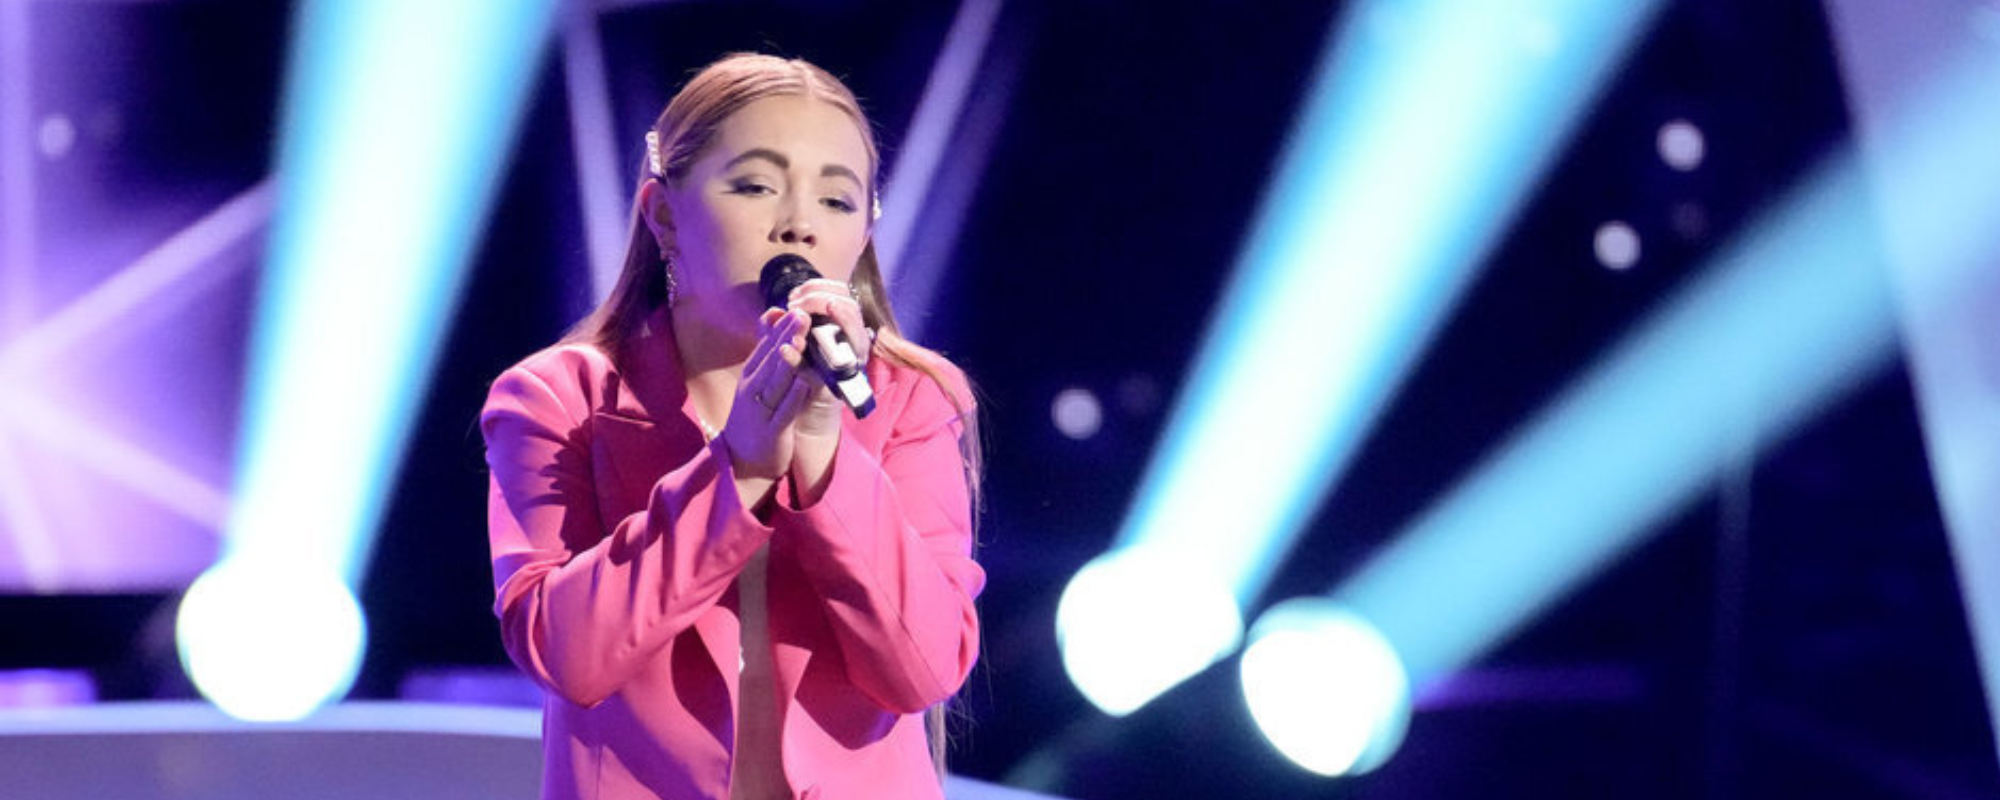 Teen Singer Joslynn Rose Stuns ‘The Voice’ with Riveting Cover of Duncan Laurence’s ‘Arcade’